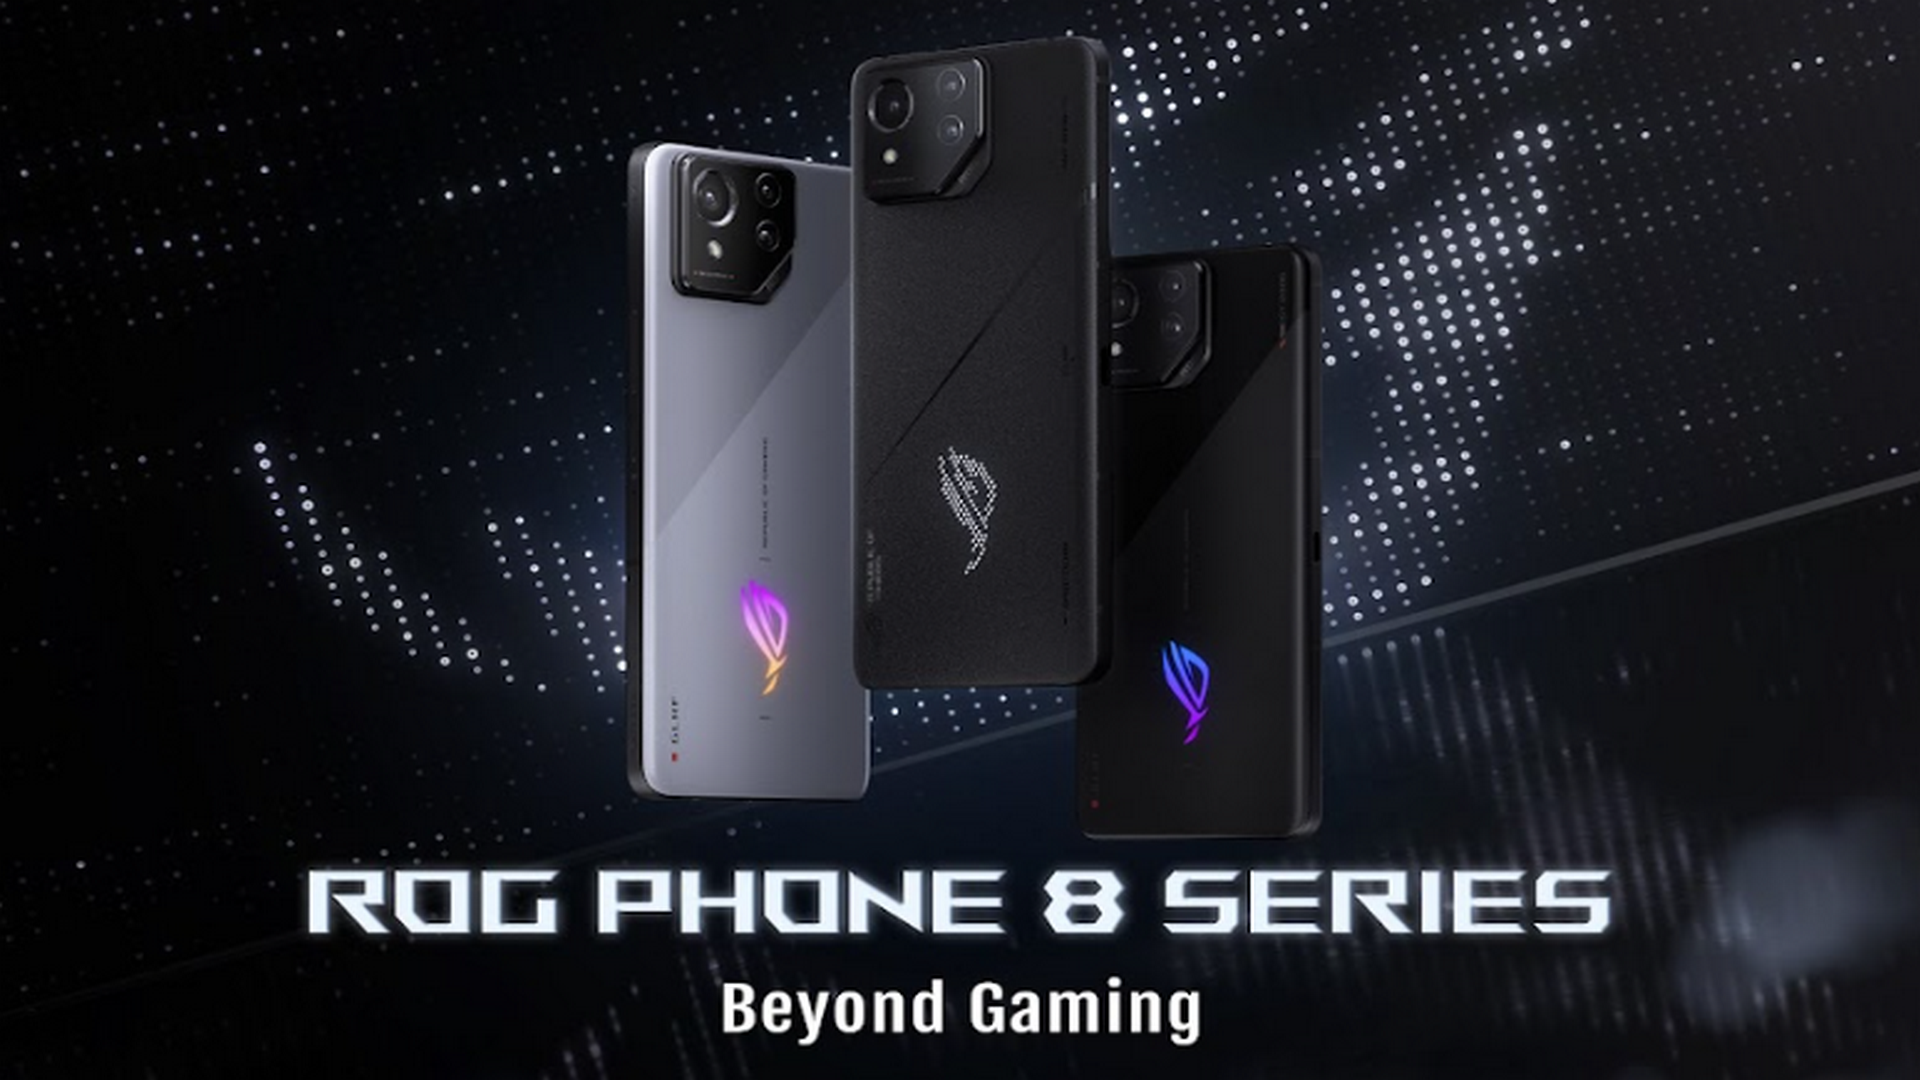 ASUS Republic Of Gamers Reveals ROG Phone 8 Series – Available Now At ASUS e-Shop & Australian & New Zealand Retailers